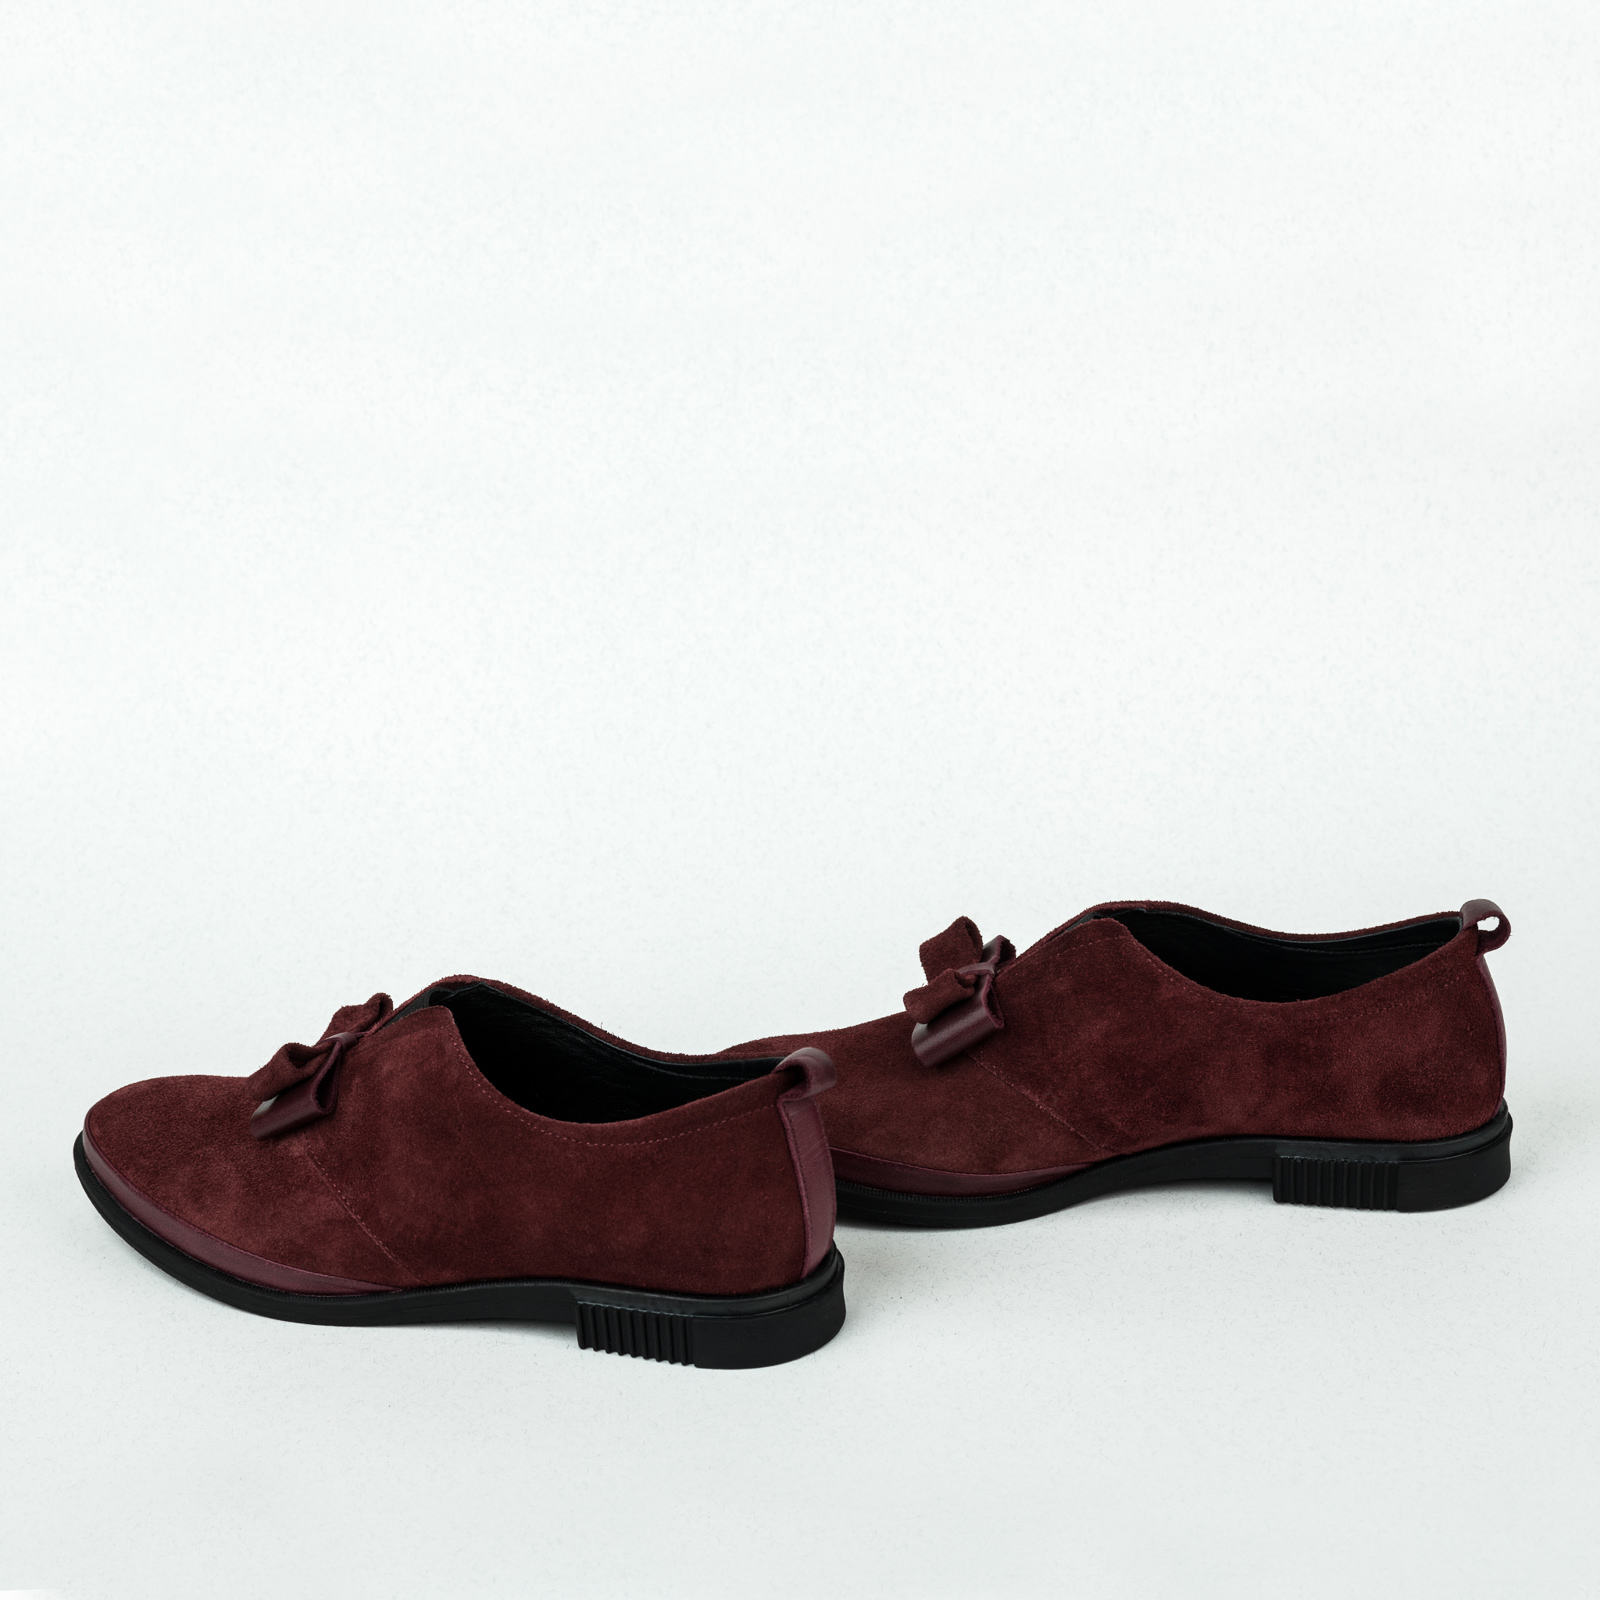 Leather shoes & flats SHIZA - WINE RED